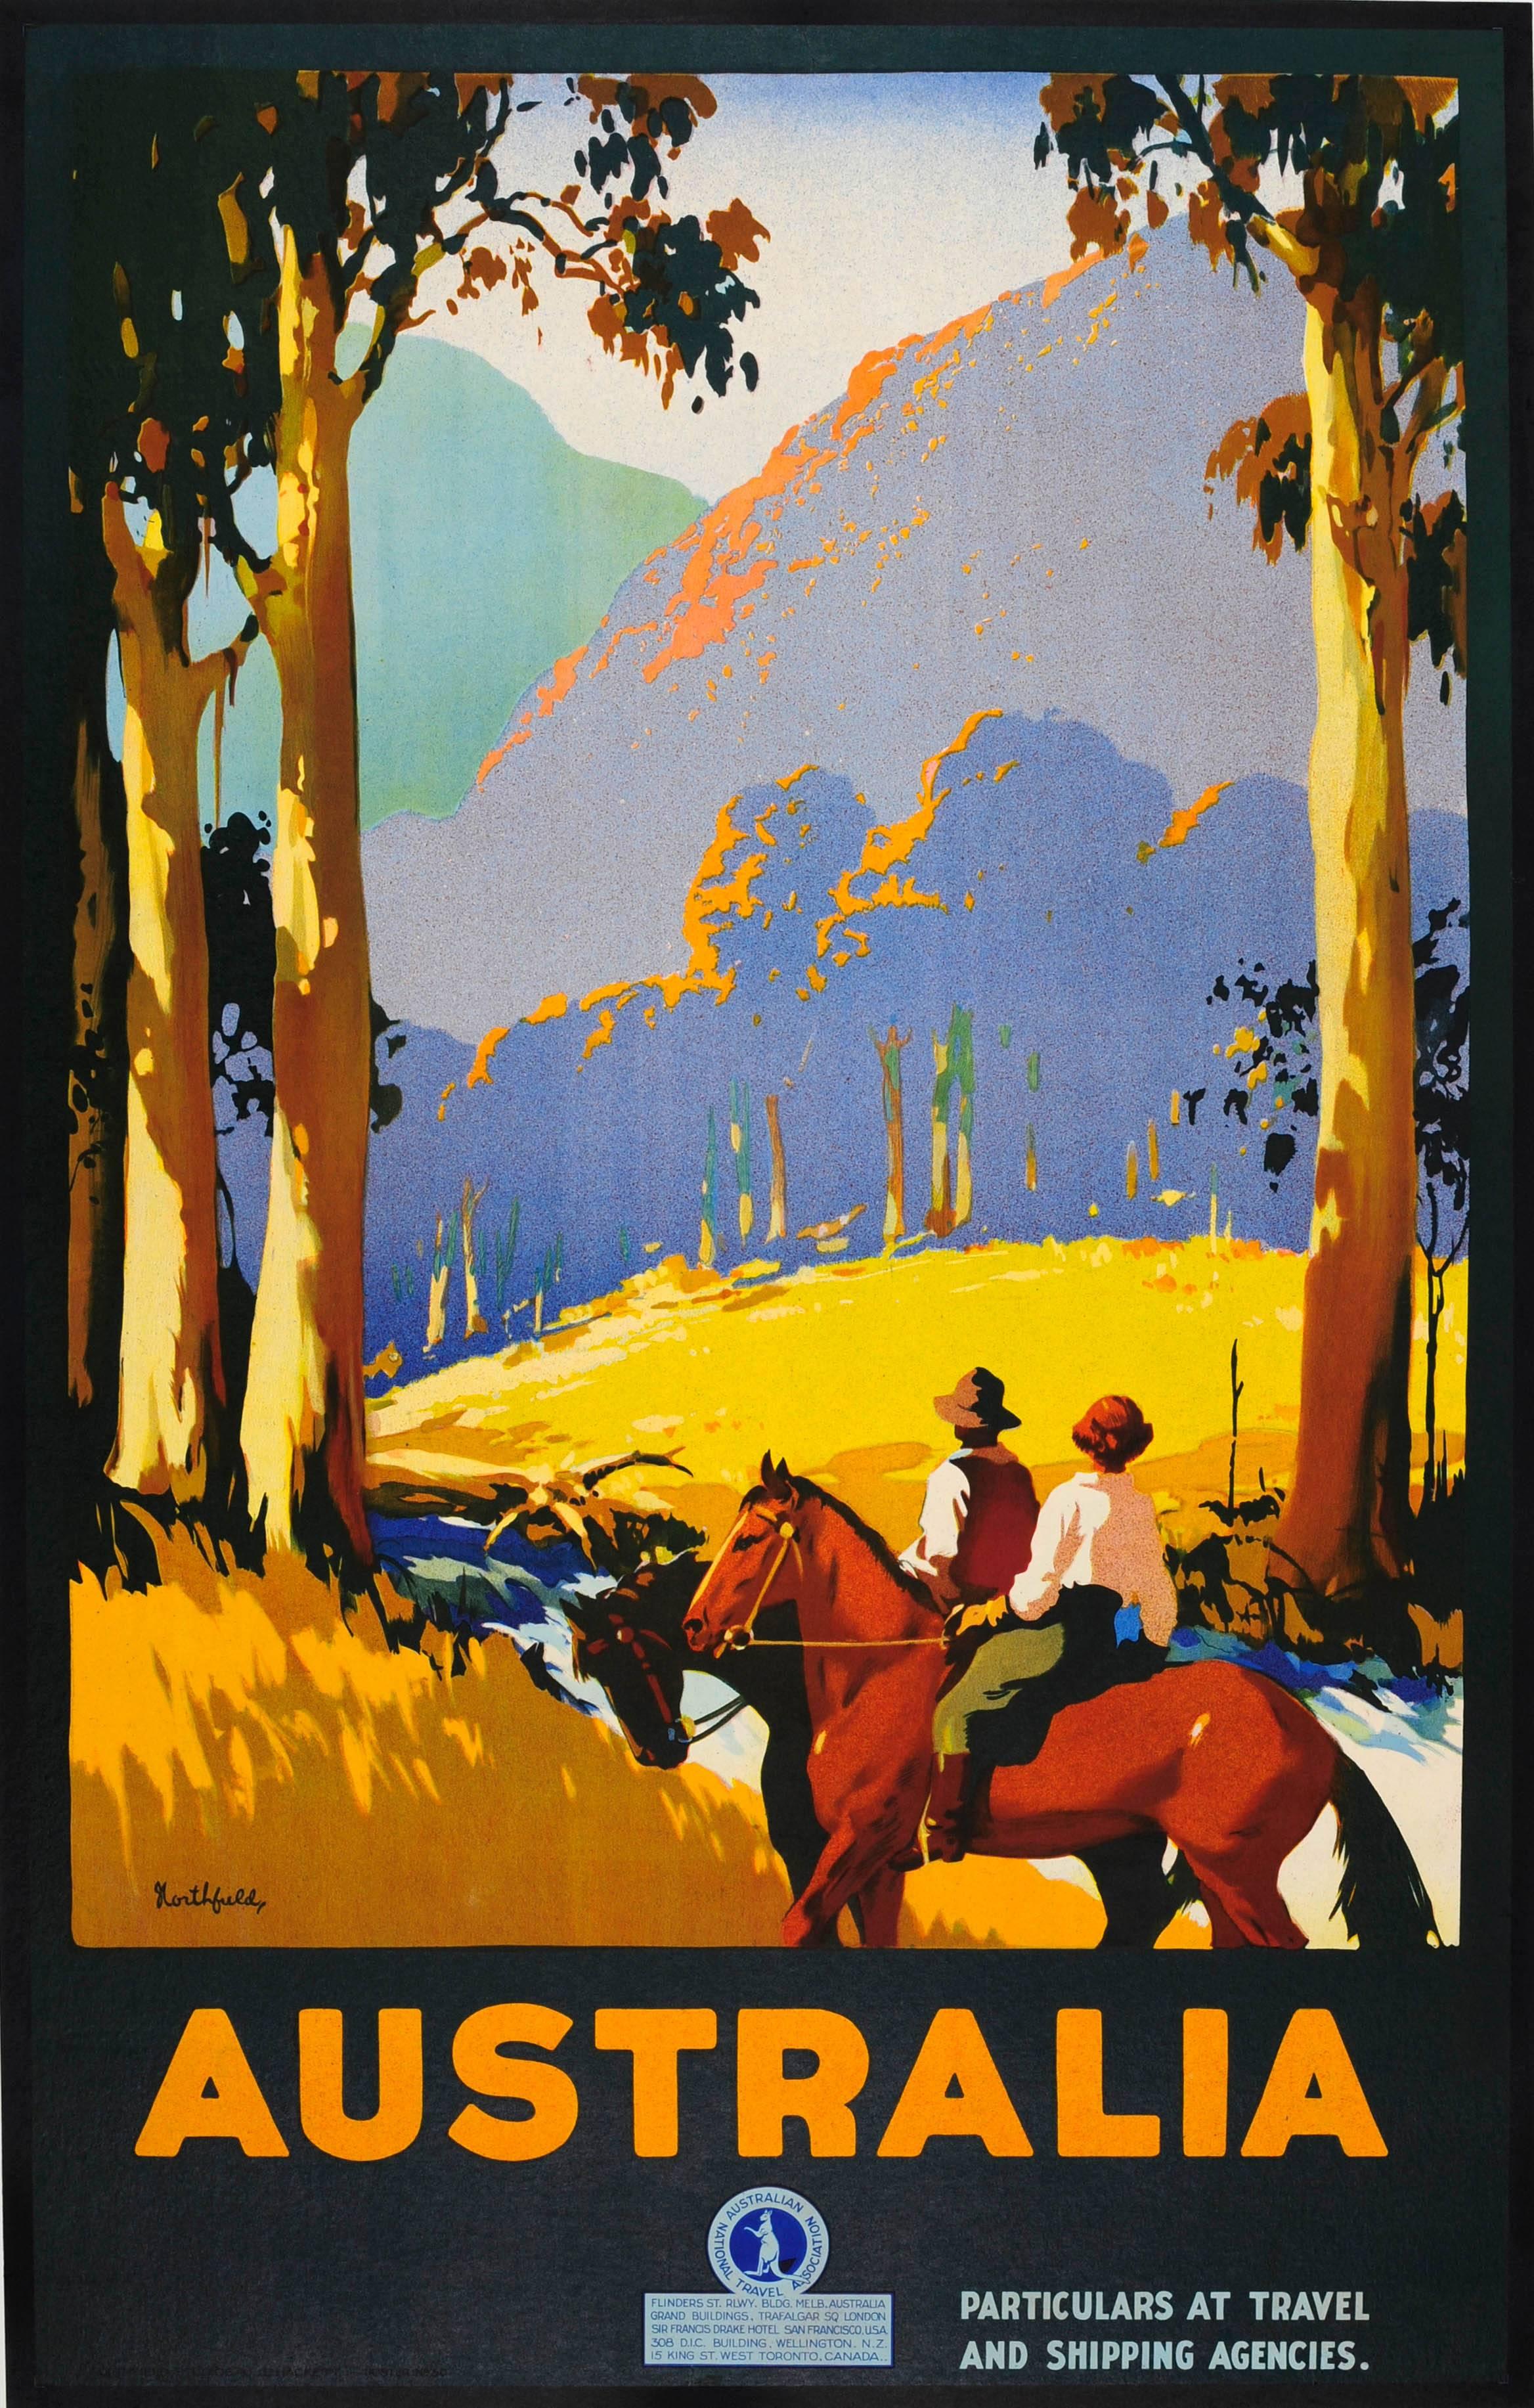 1920s travel posters